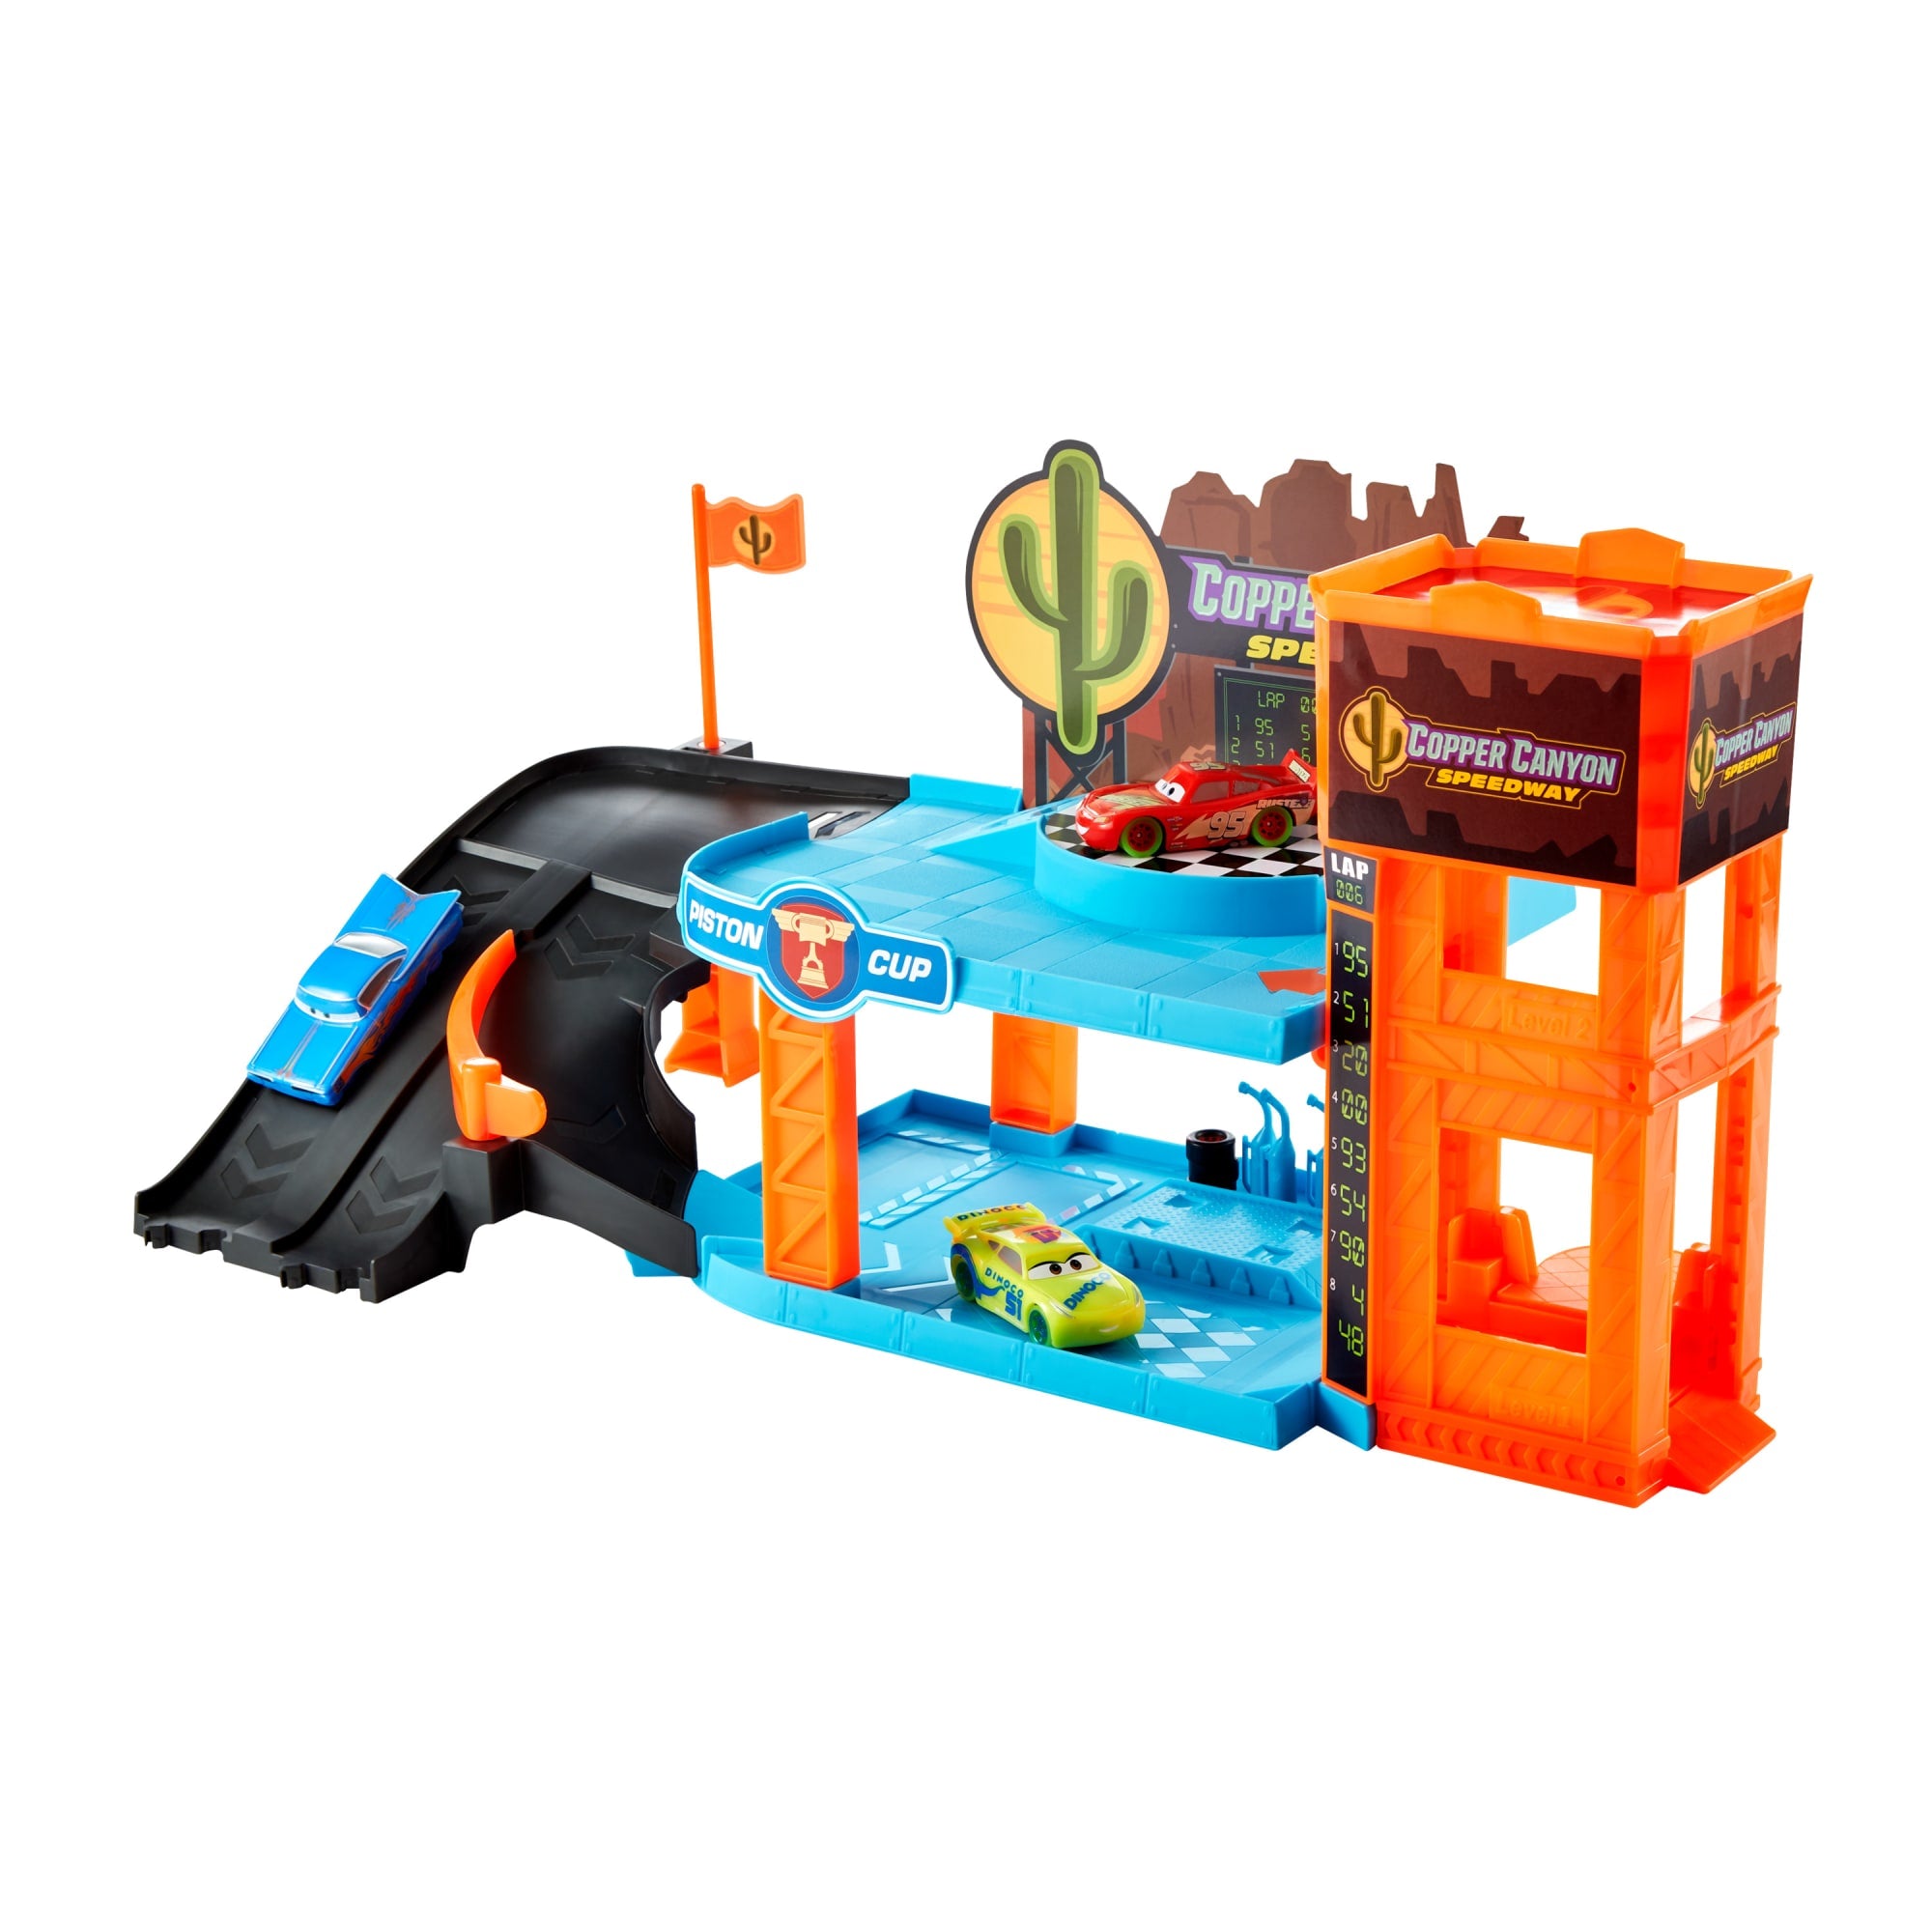 Disney And Pixar Cars Glow Racers Copper Canyon Glowing Garage Playset ...